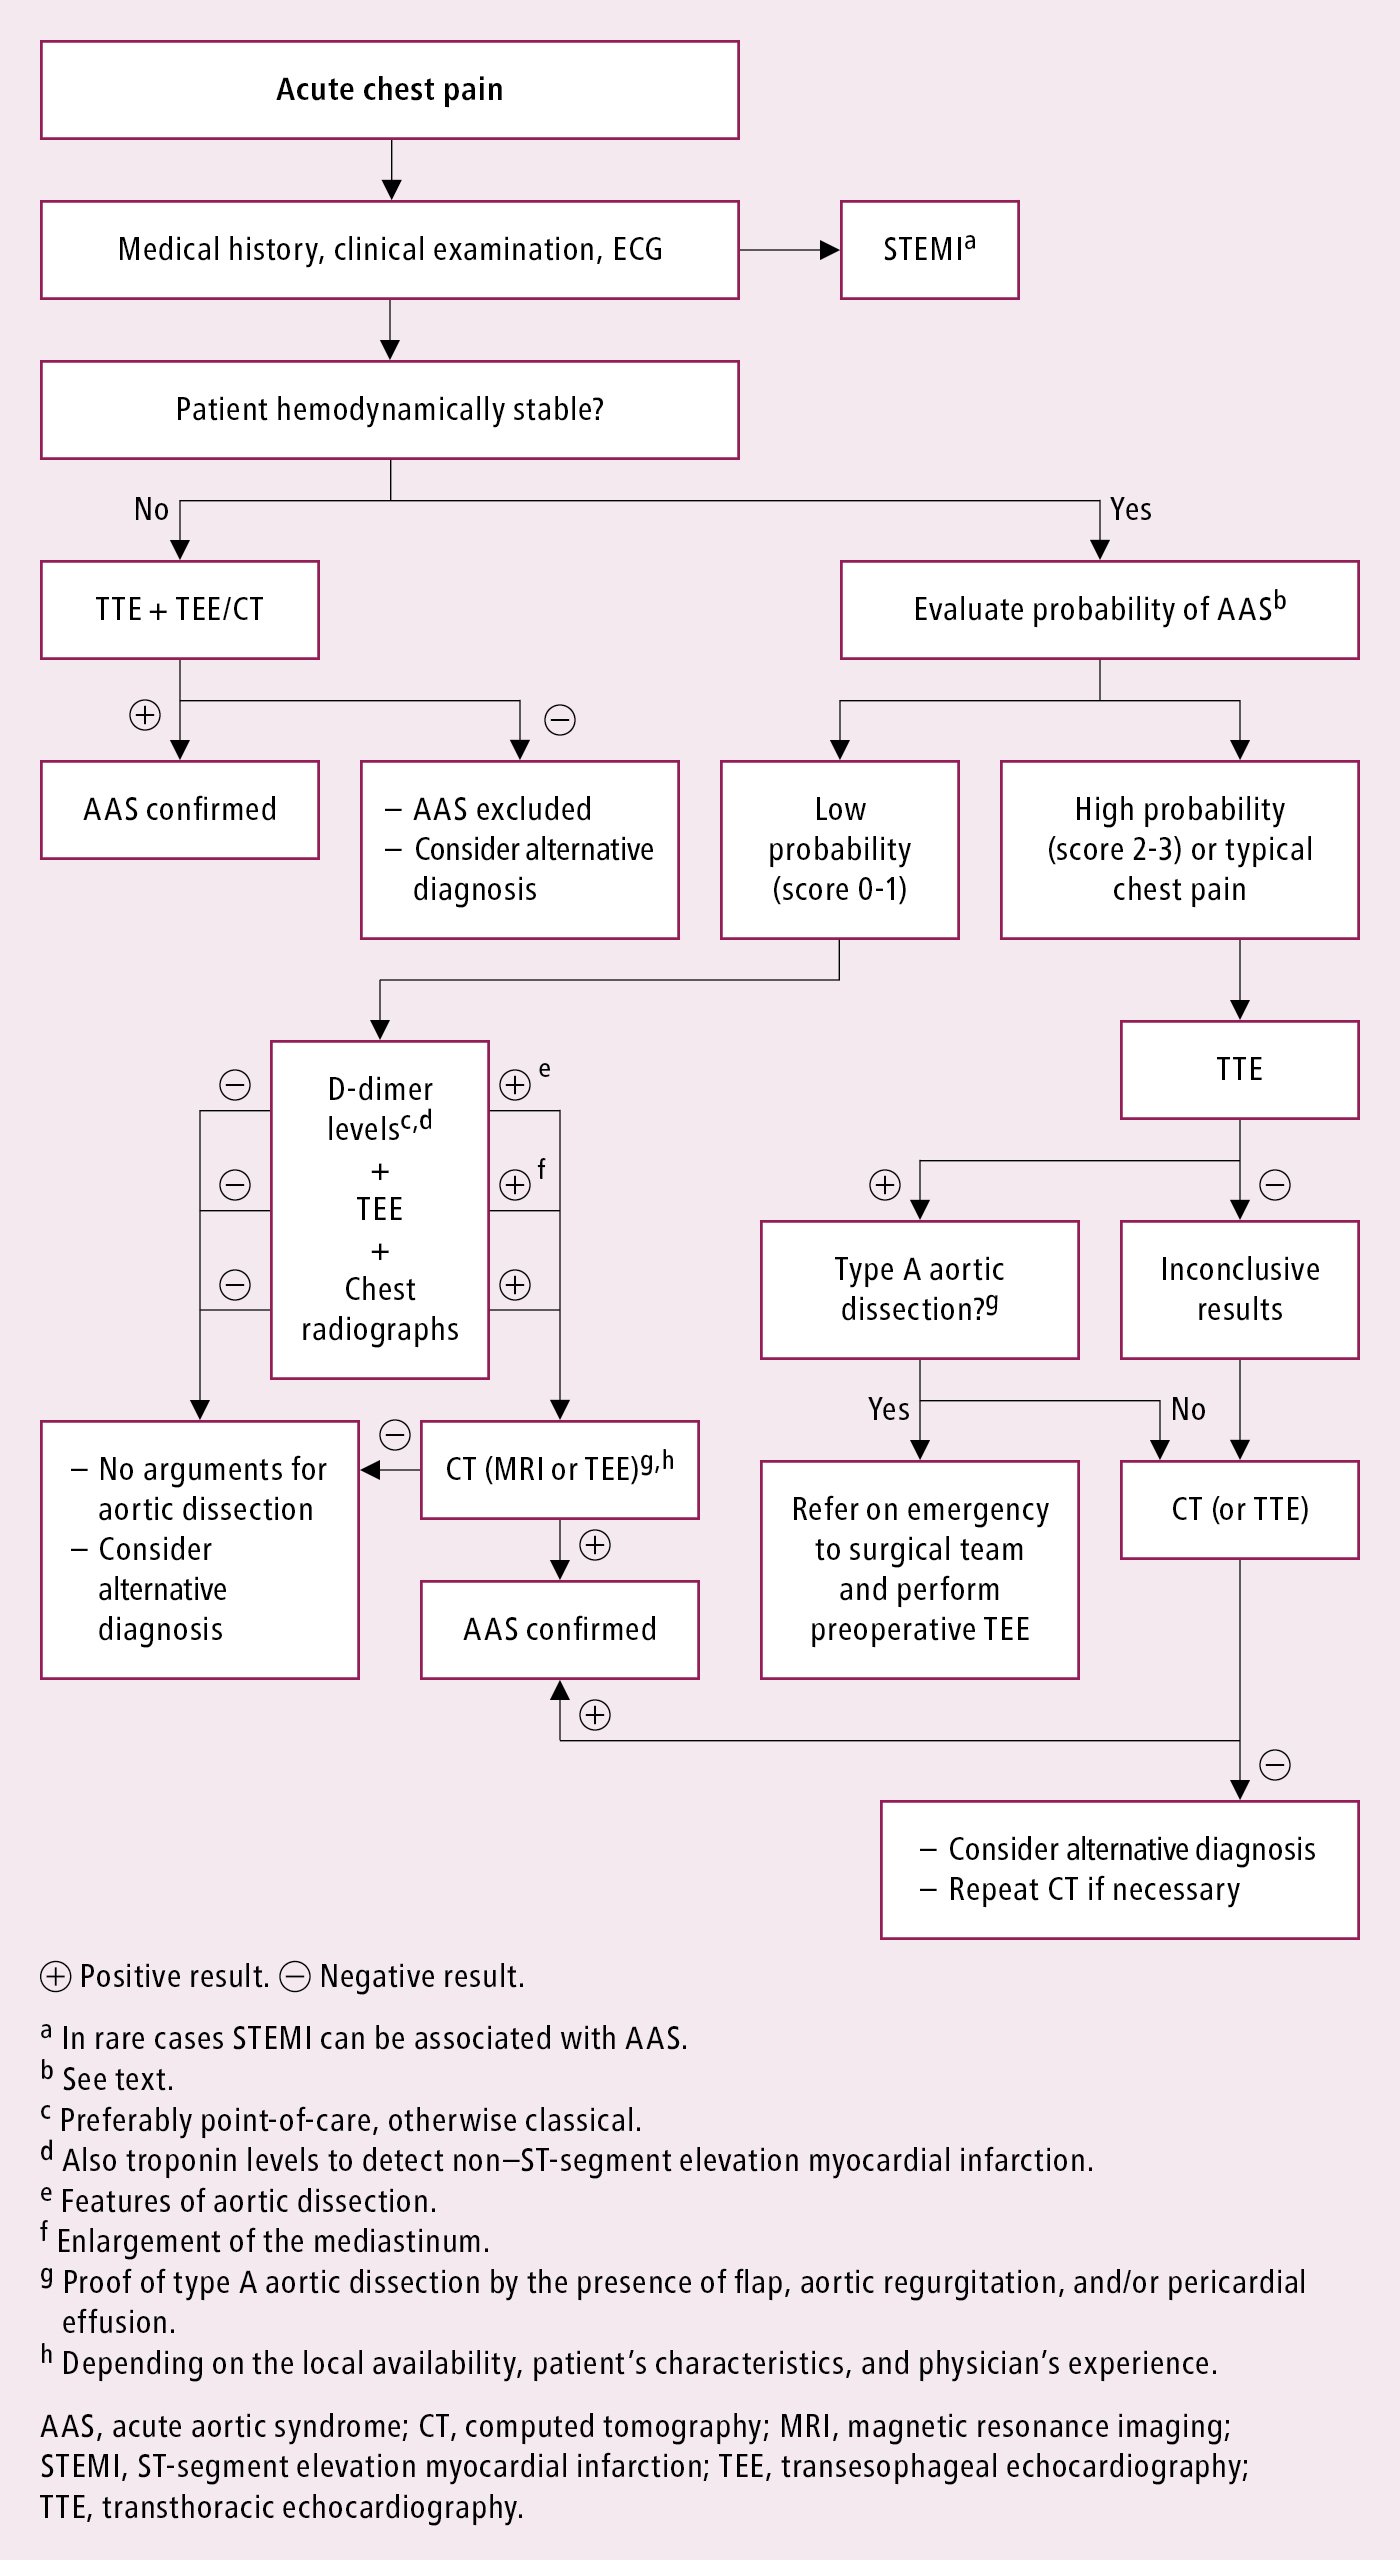 Figure 031_6916.  Diagnosis of suspected acute aortic syndrome.  Based on    Eur Heart J. 2014;35(41):2873-926   .  